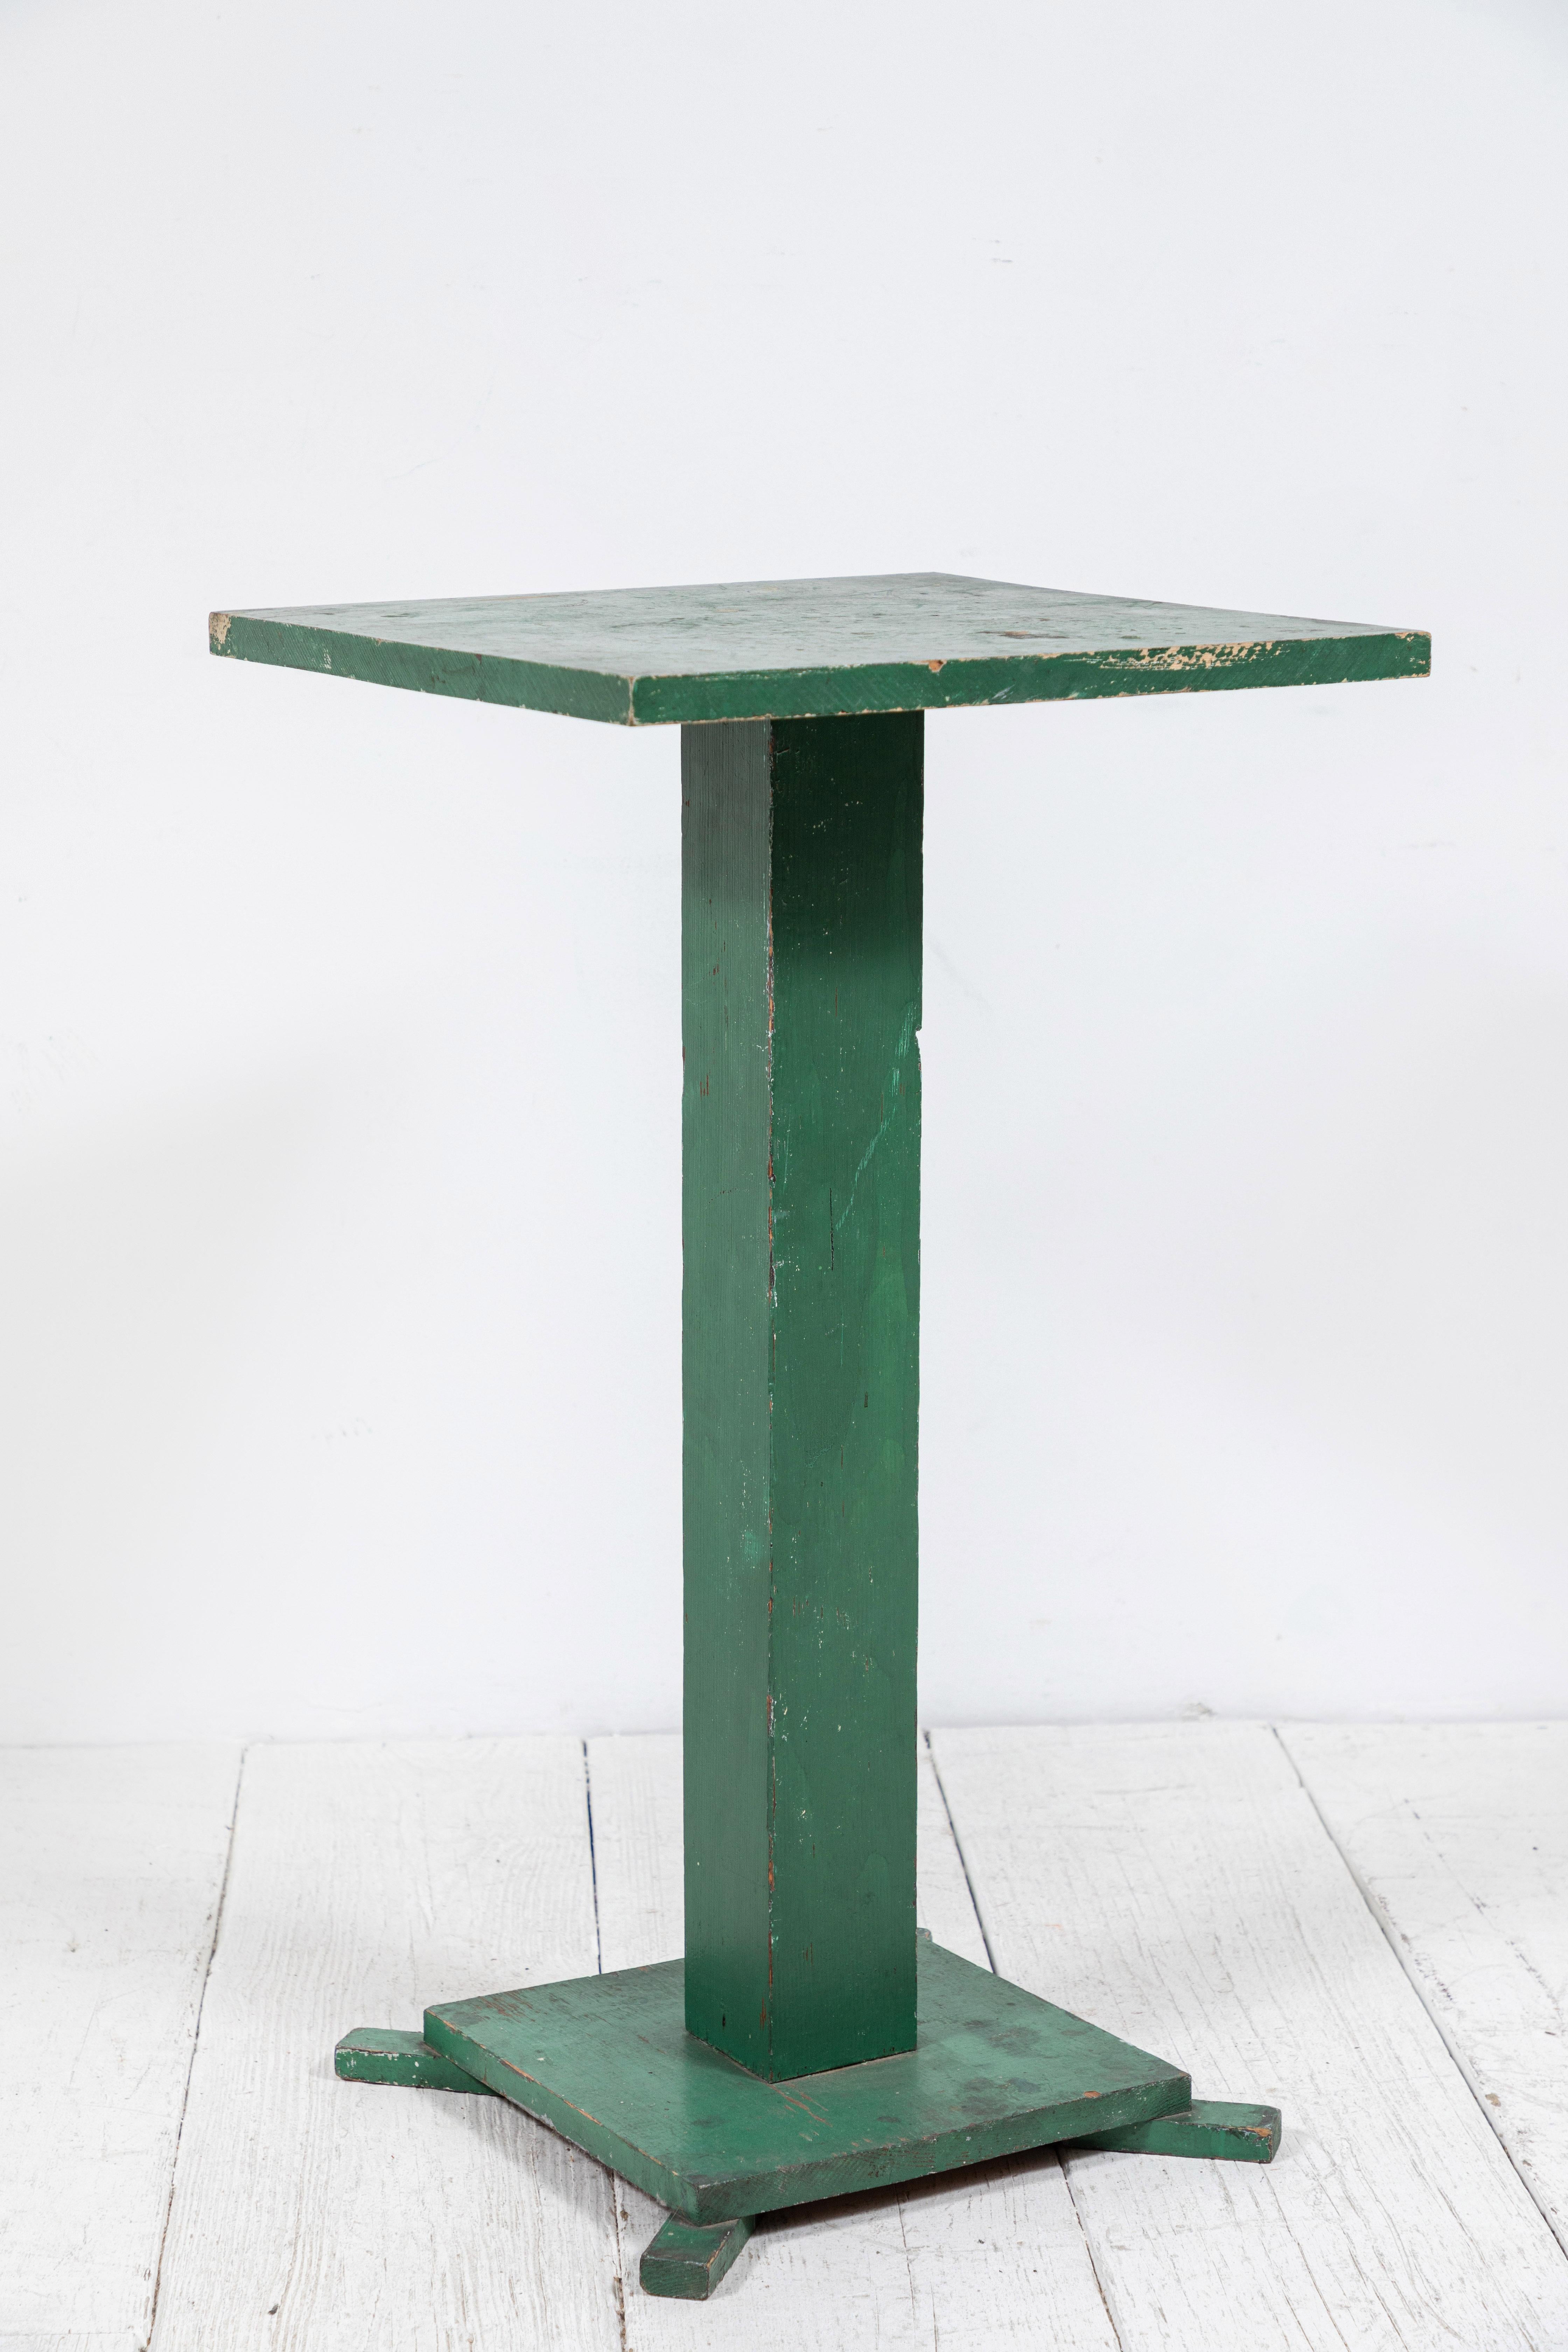 Wood Early American Green Painted Pedestal Table 